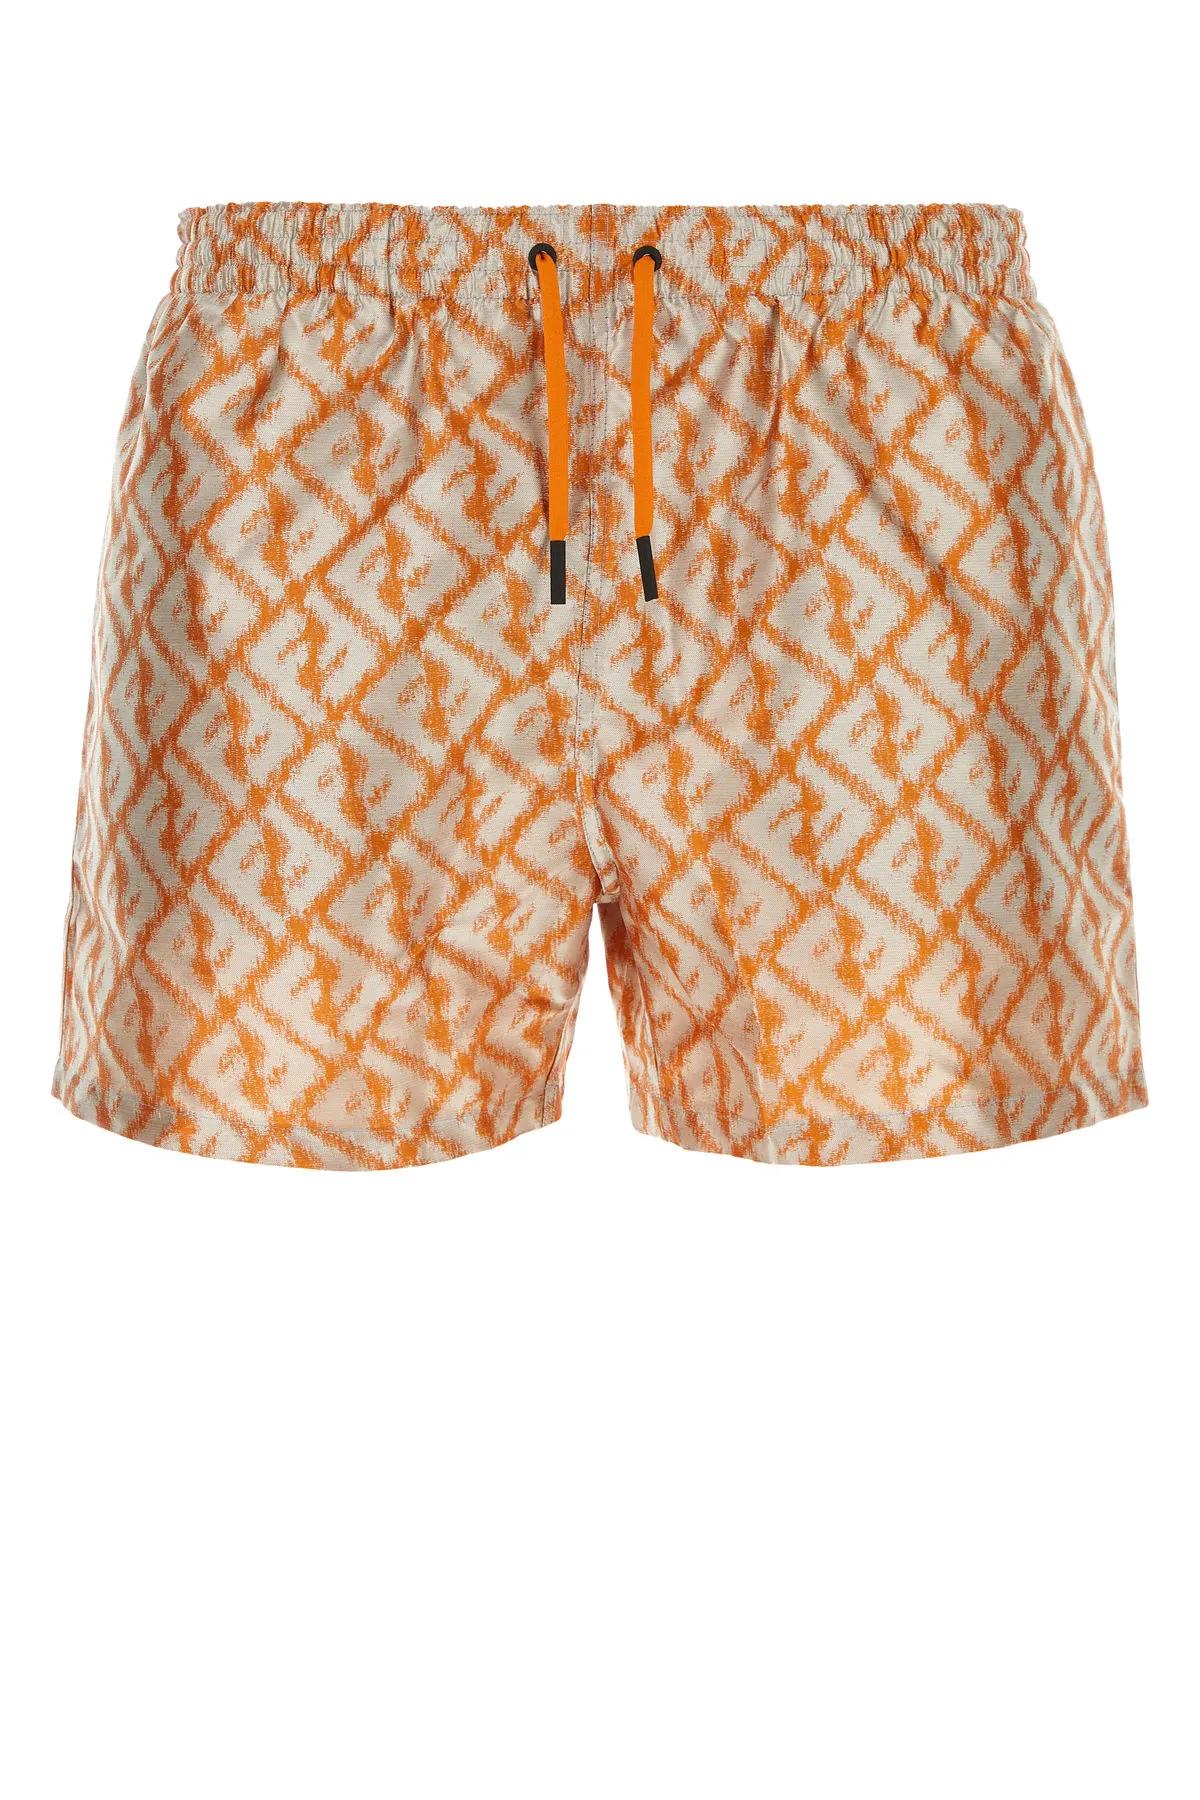 Fendi Embroidered Polyester Swimming Shorts